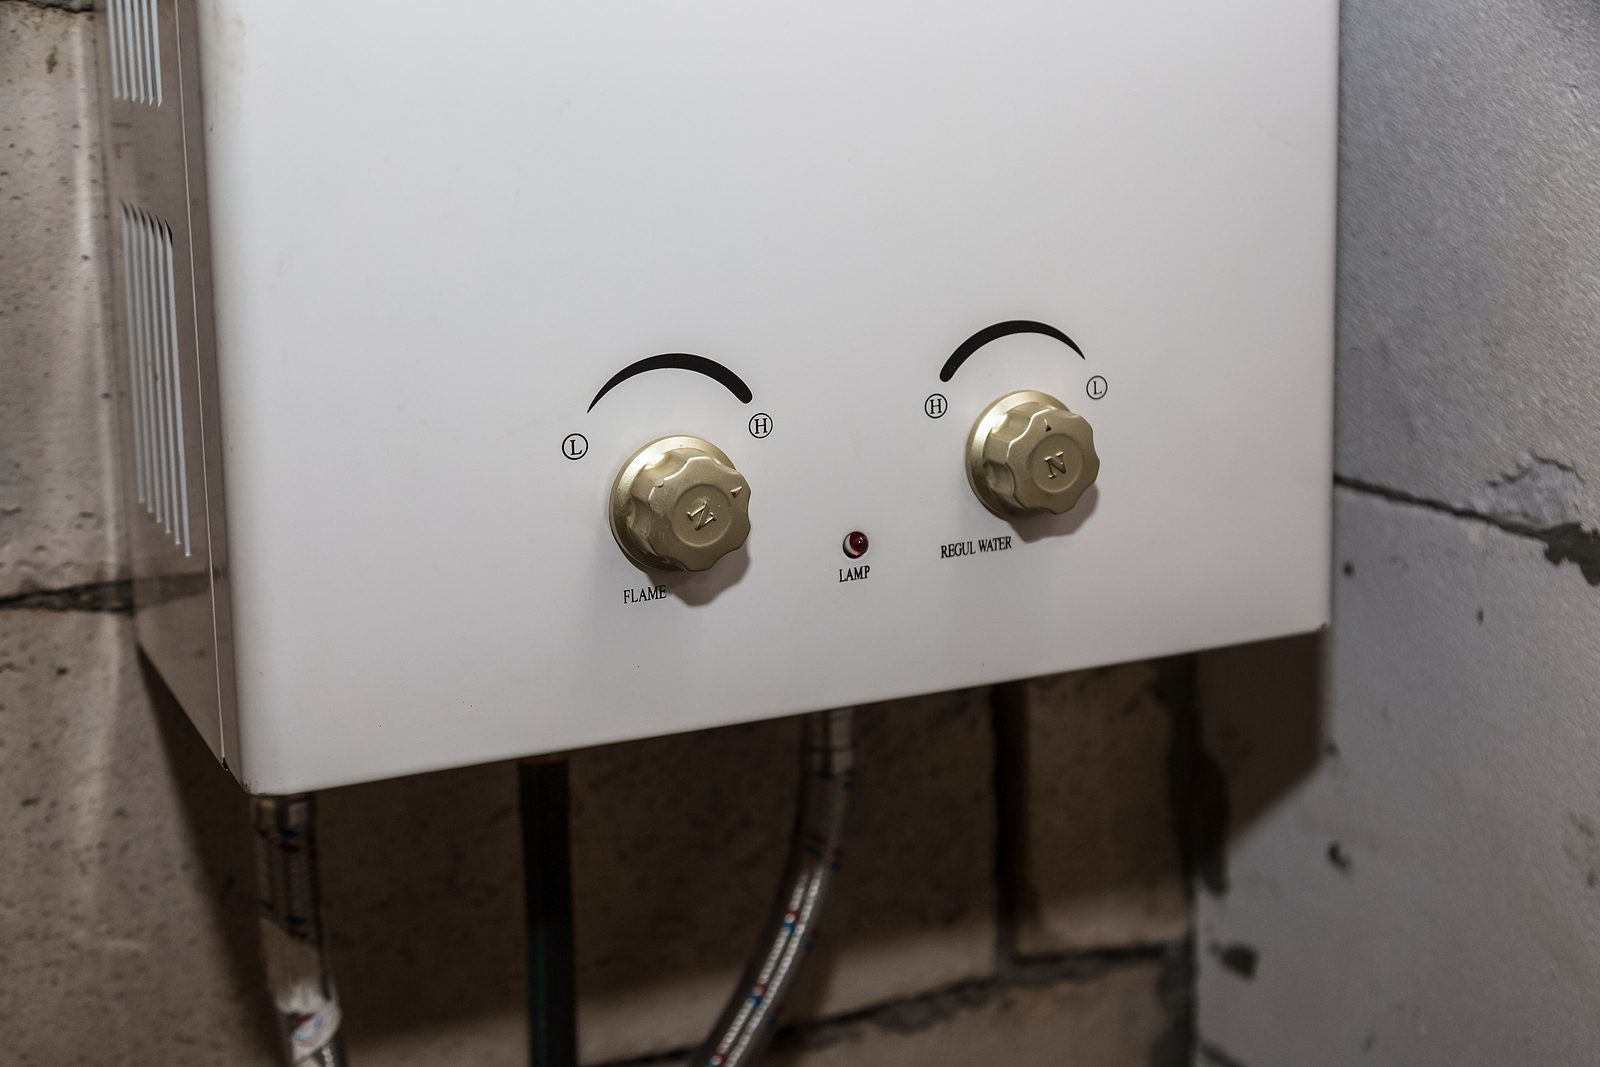 Understanding Water Heater Efficiency Ratings: What Do They Mean?